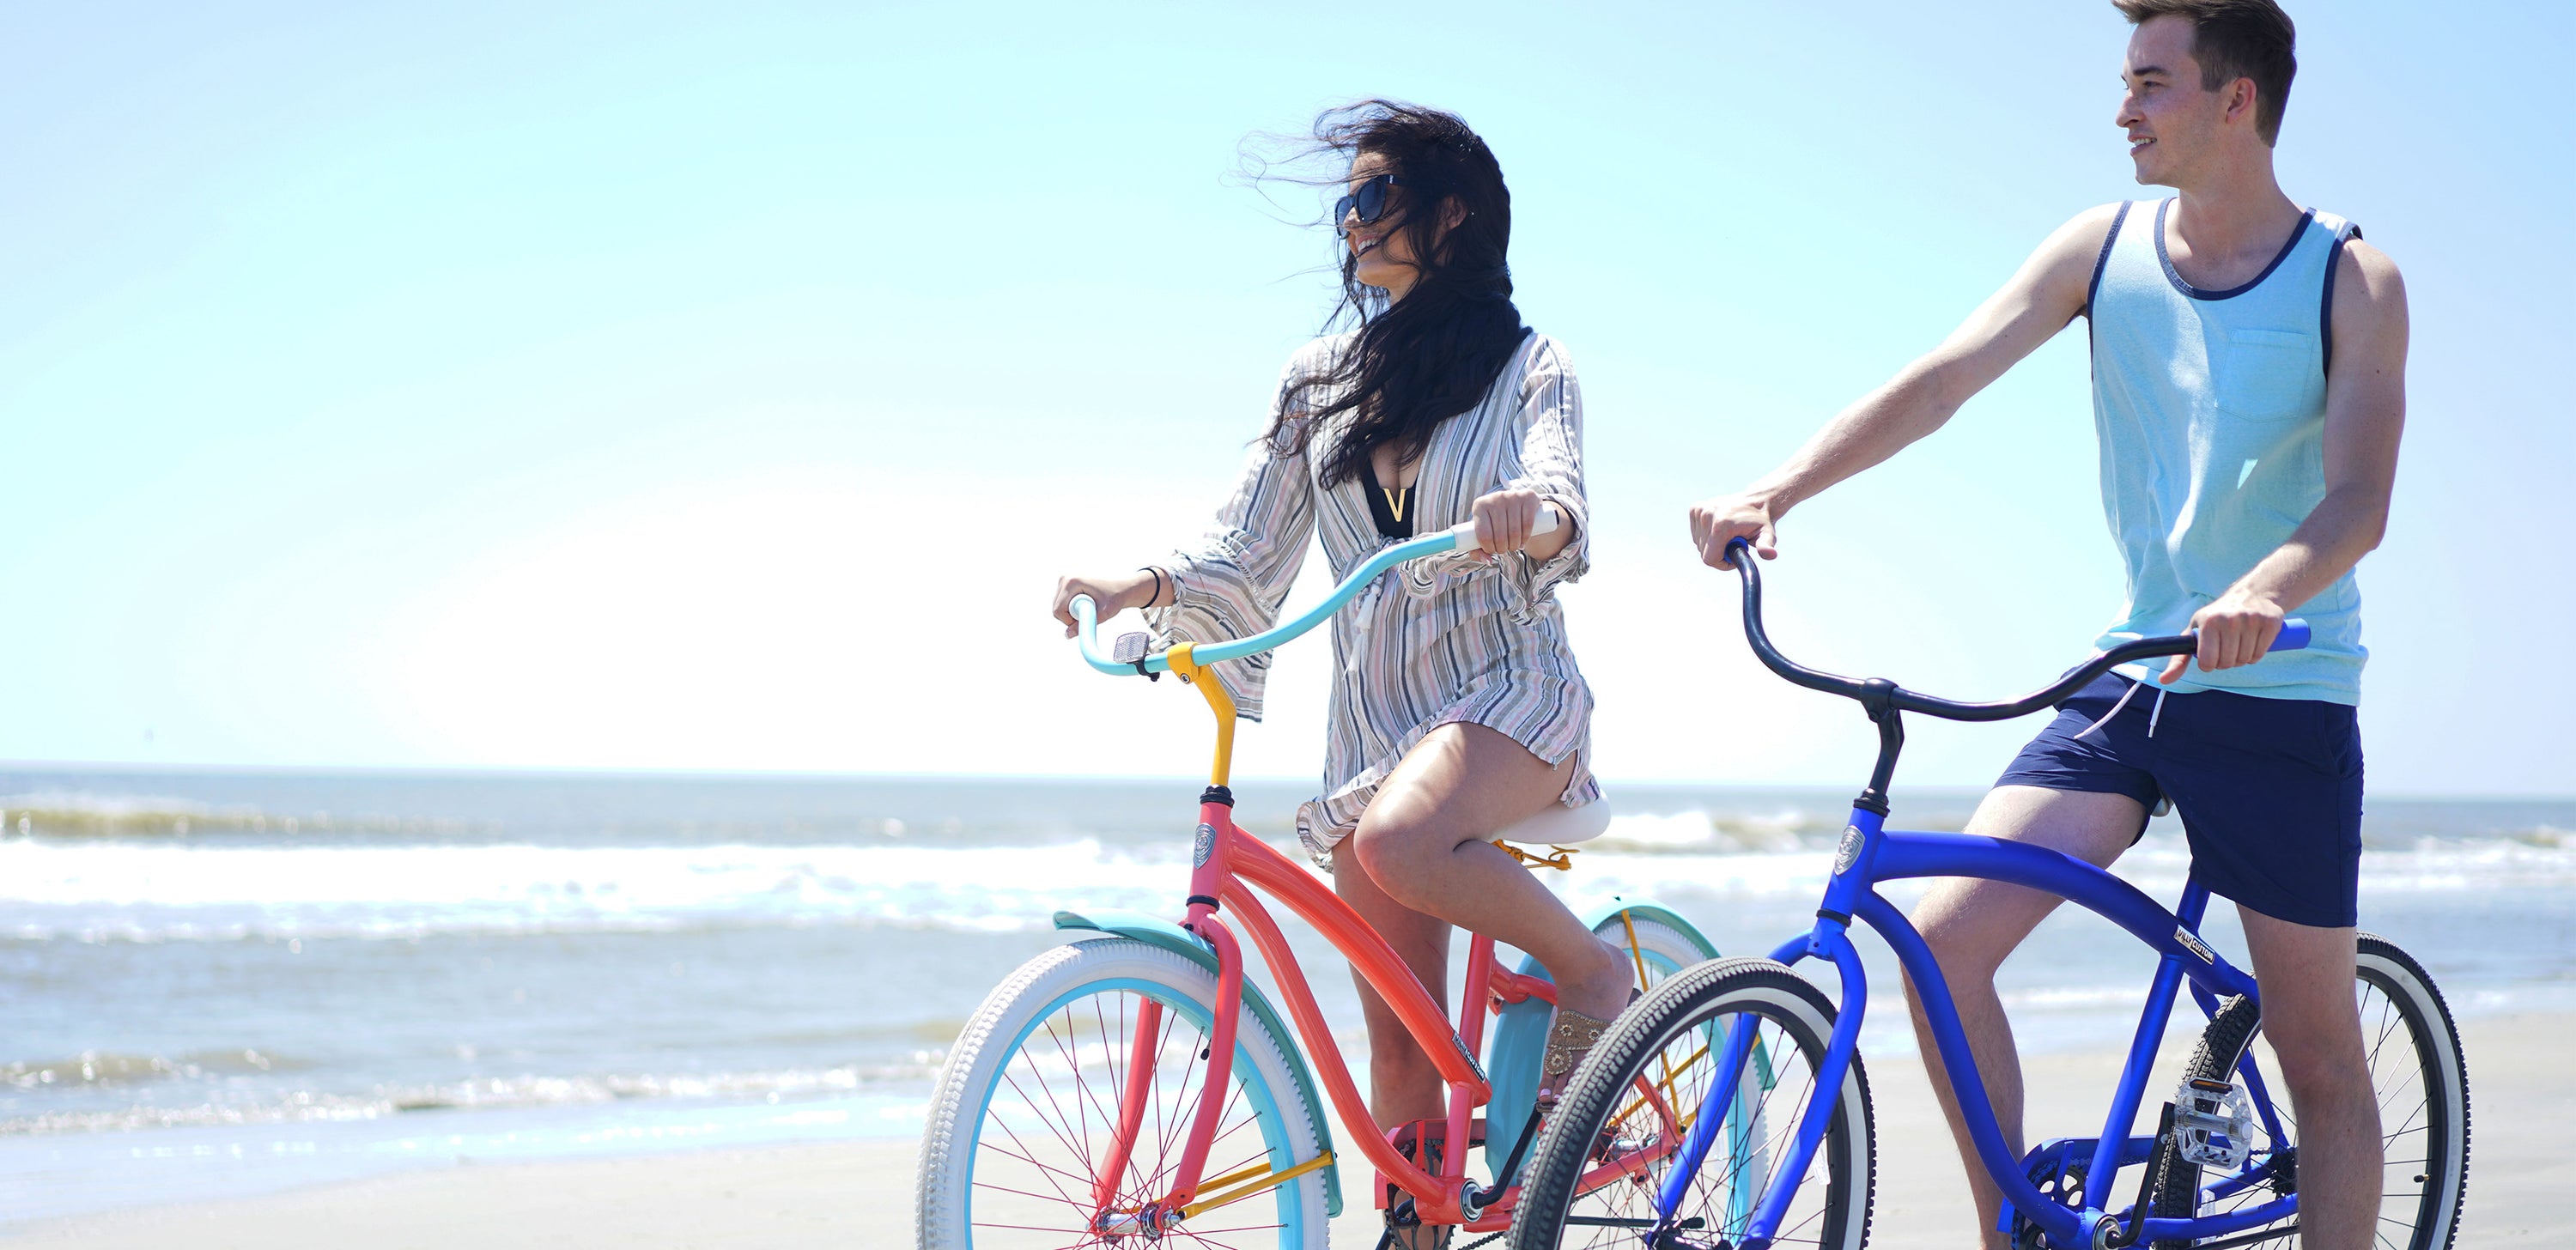 A girl on her pink Villy bike and a guy on his blue Villy bike enjoying the breeze on the beach shoreline